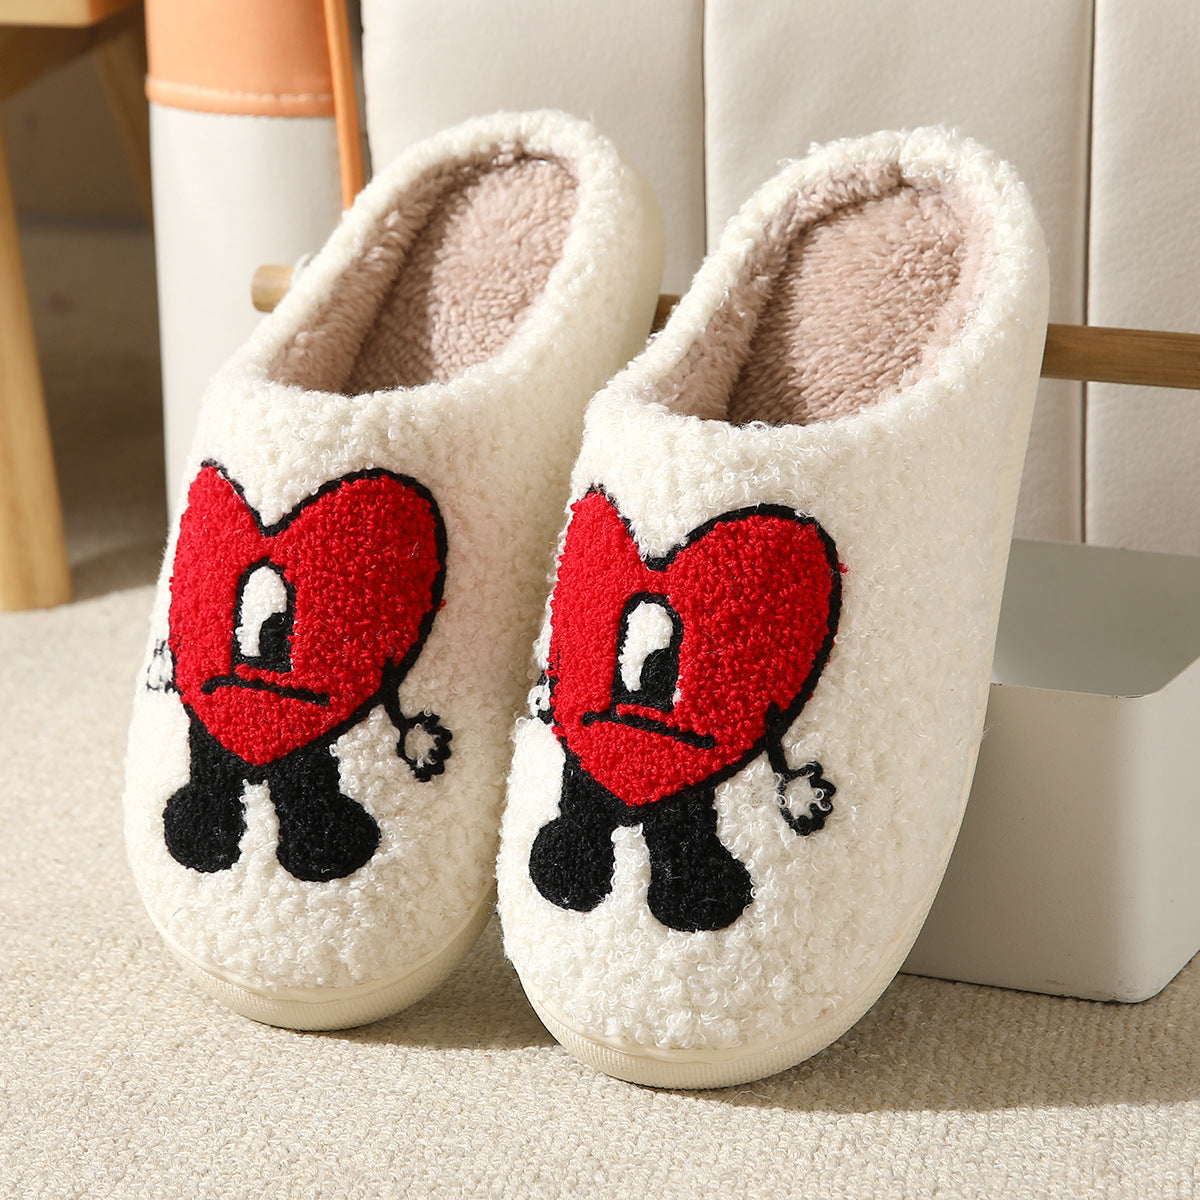 「lovevop」Cute Cartoon Plush Bedroom Slippers - Anti-Slip Home Shoes for Comfort and Style!